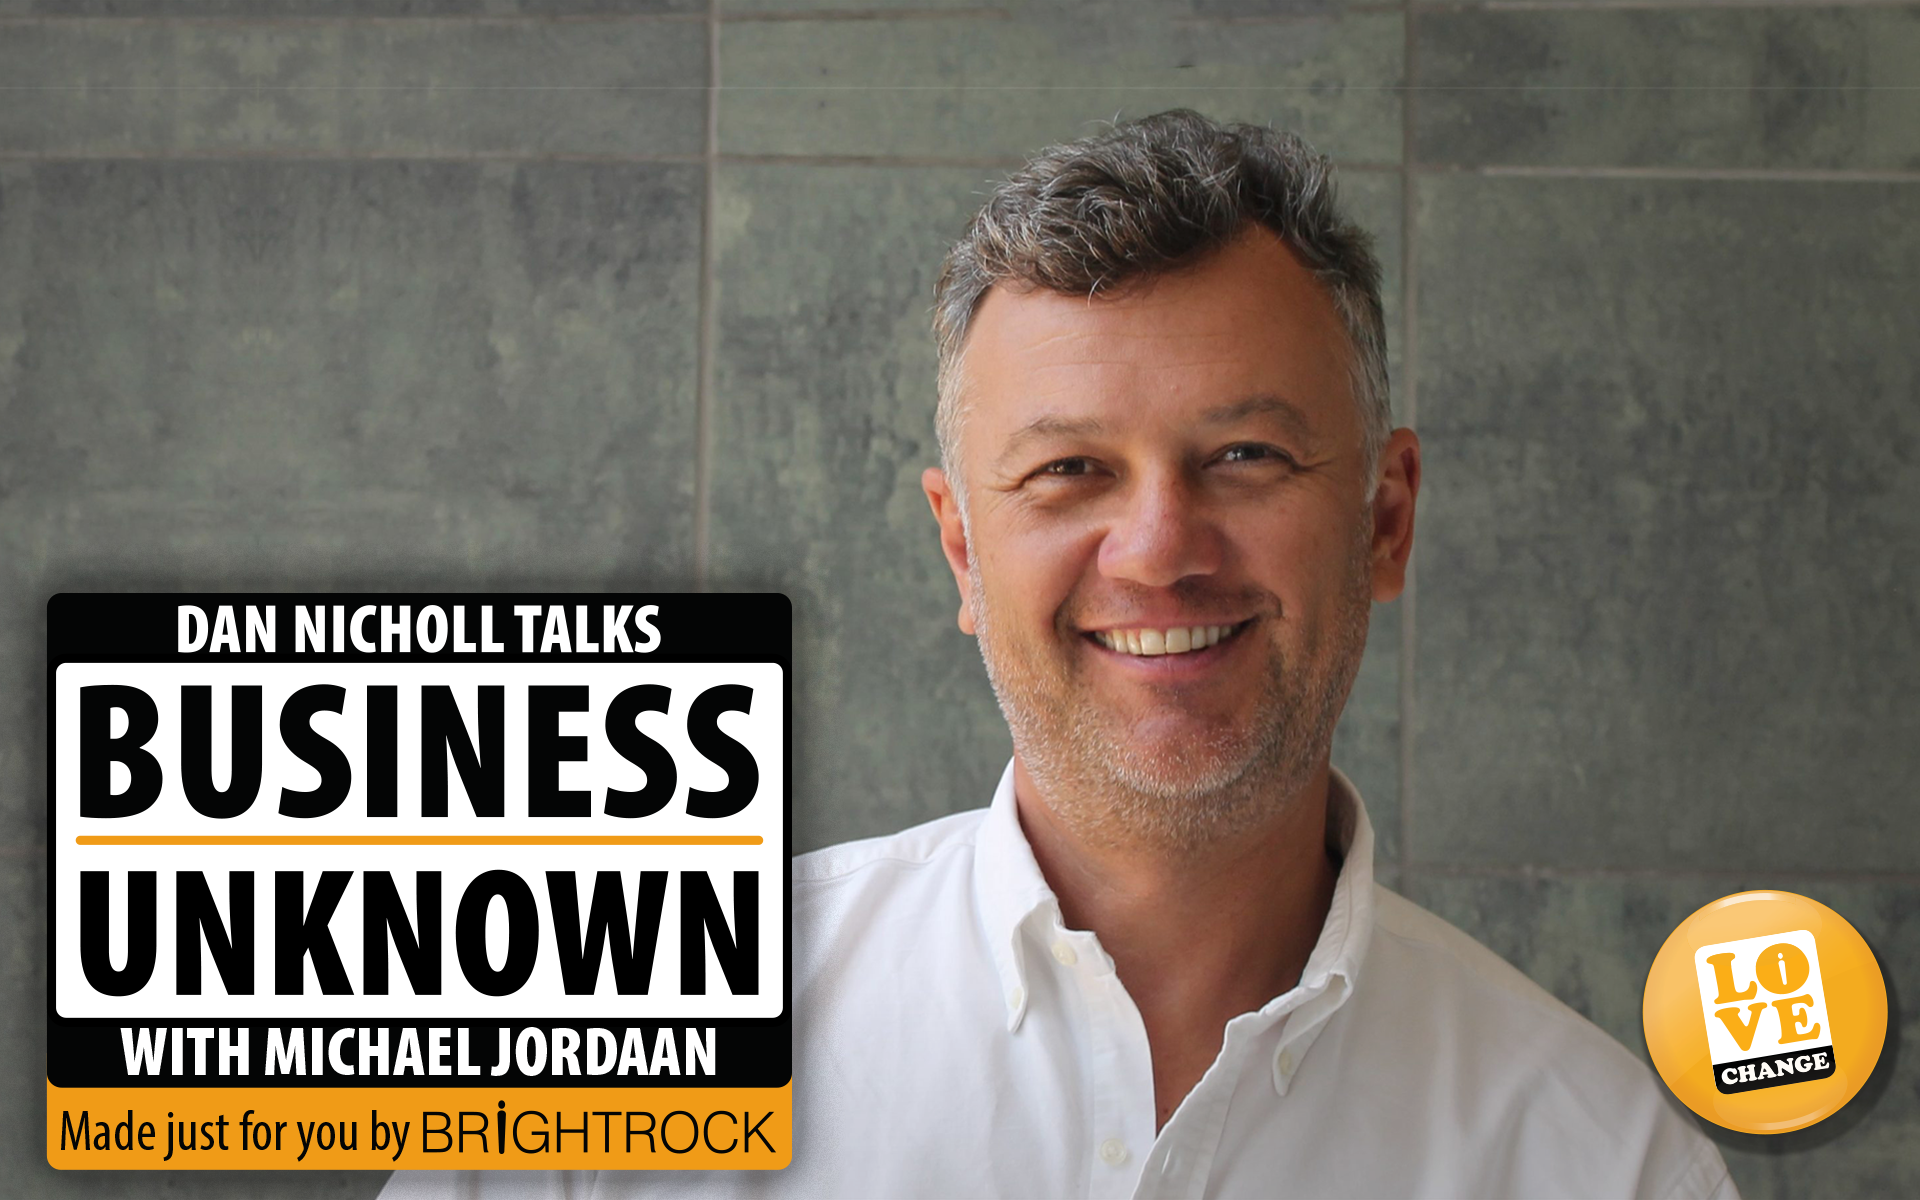 Business Unknown with Episode 3 with Dan Nicholl and Michael Jordaan